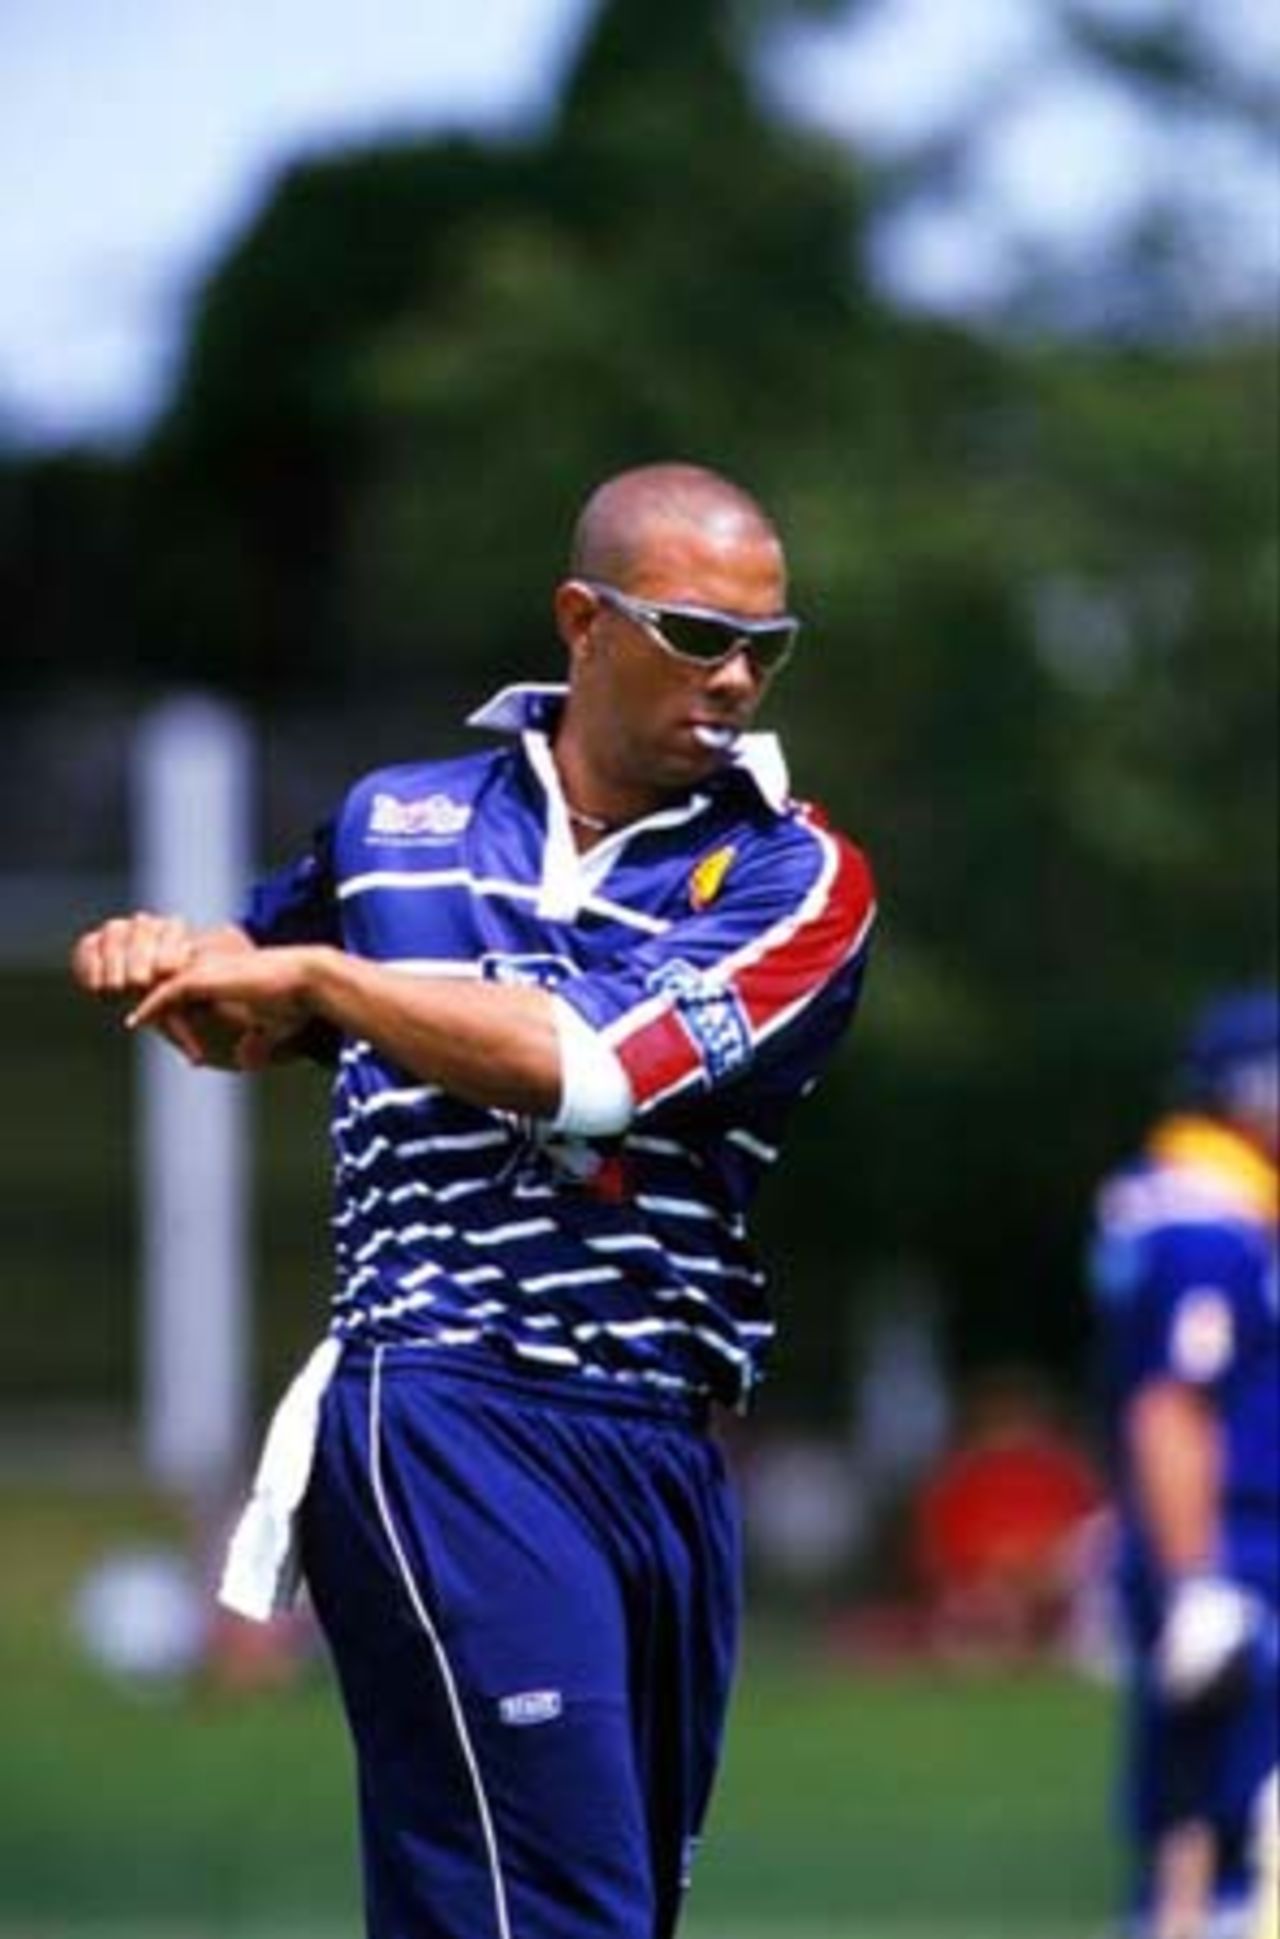 Auckland medium fast bowler Andre Adams does some warm-up stretches before his spell of 1-17 from 10 overs. Shell Cup: Auckland v Otago at Eden Park Outer Oval, Auckland, 17 December 2000.